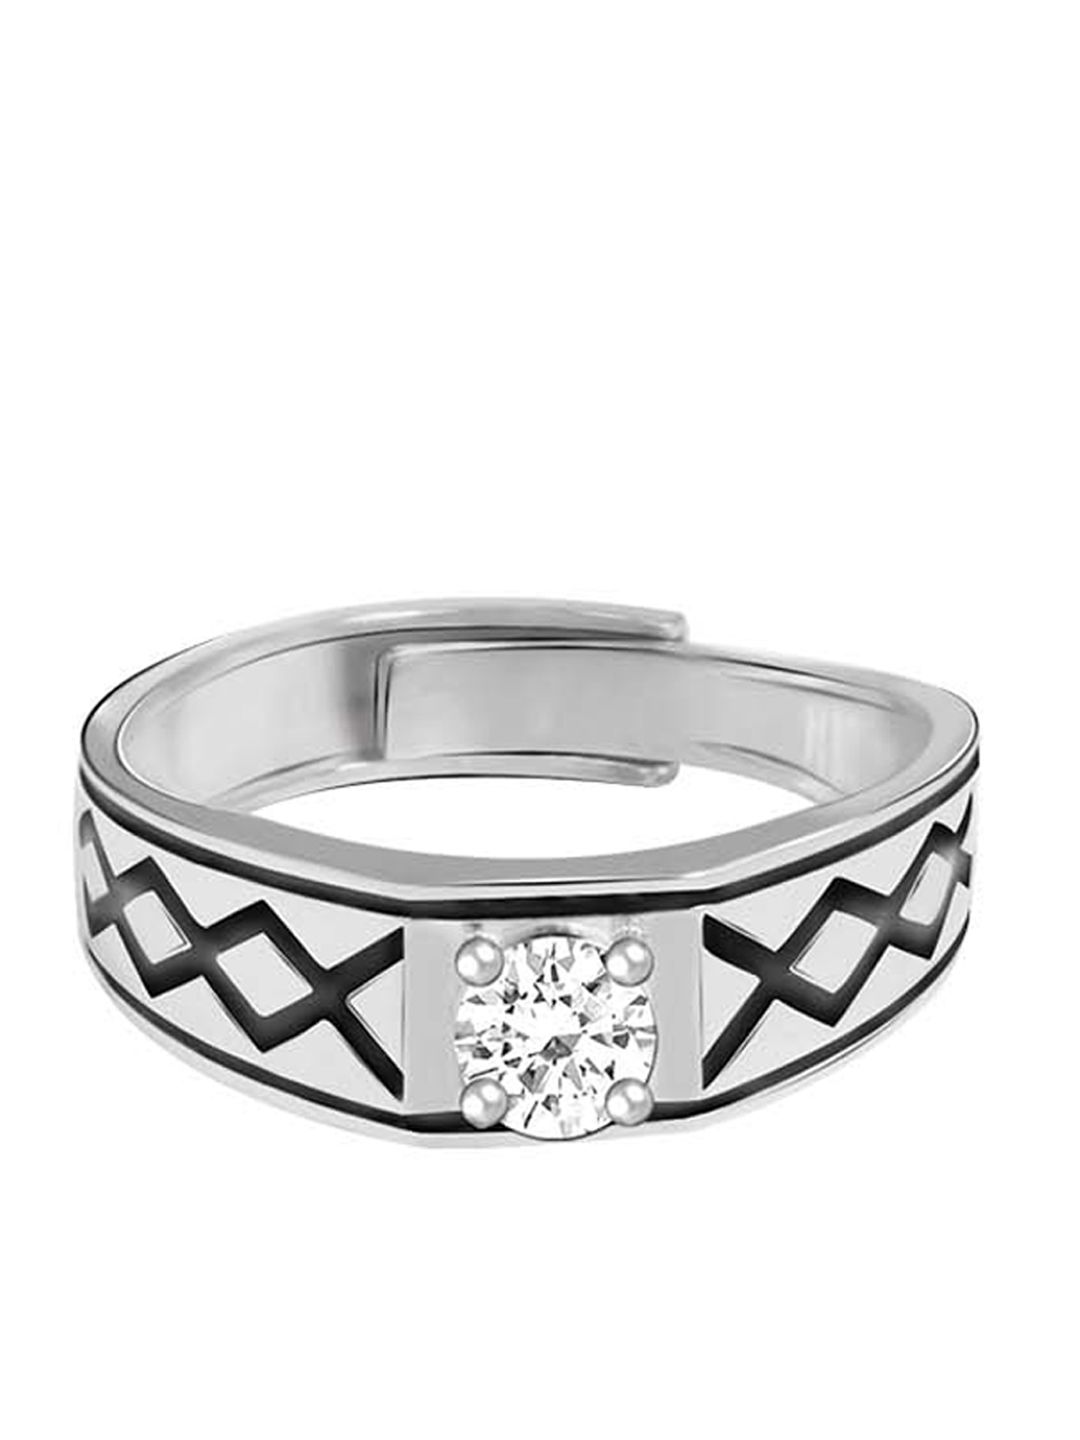 GIVA 925 Sterling Silver Rhodium-Plated White CZ-Studded Adjustable Finger Ring Price in India